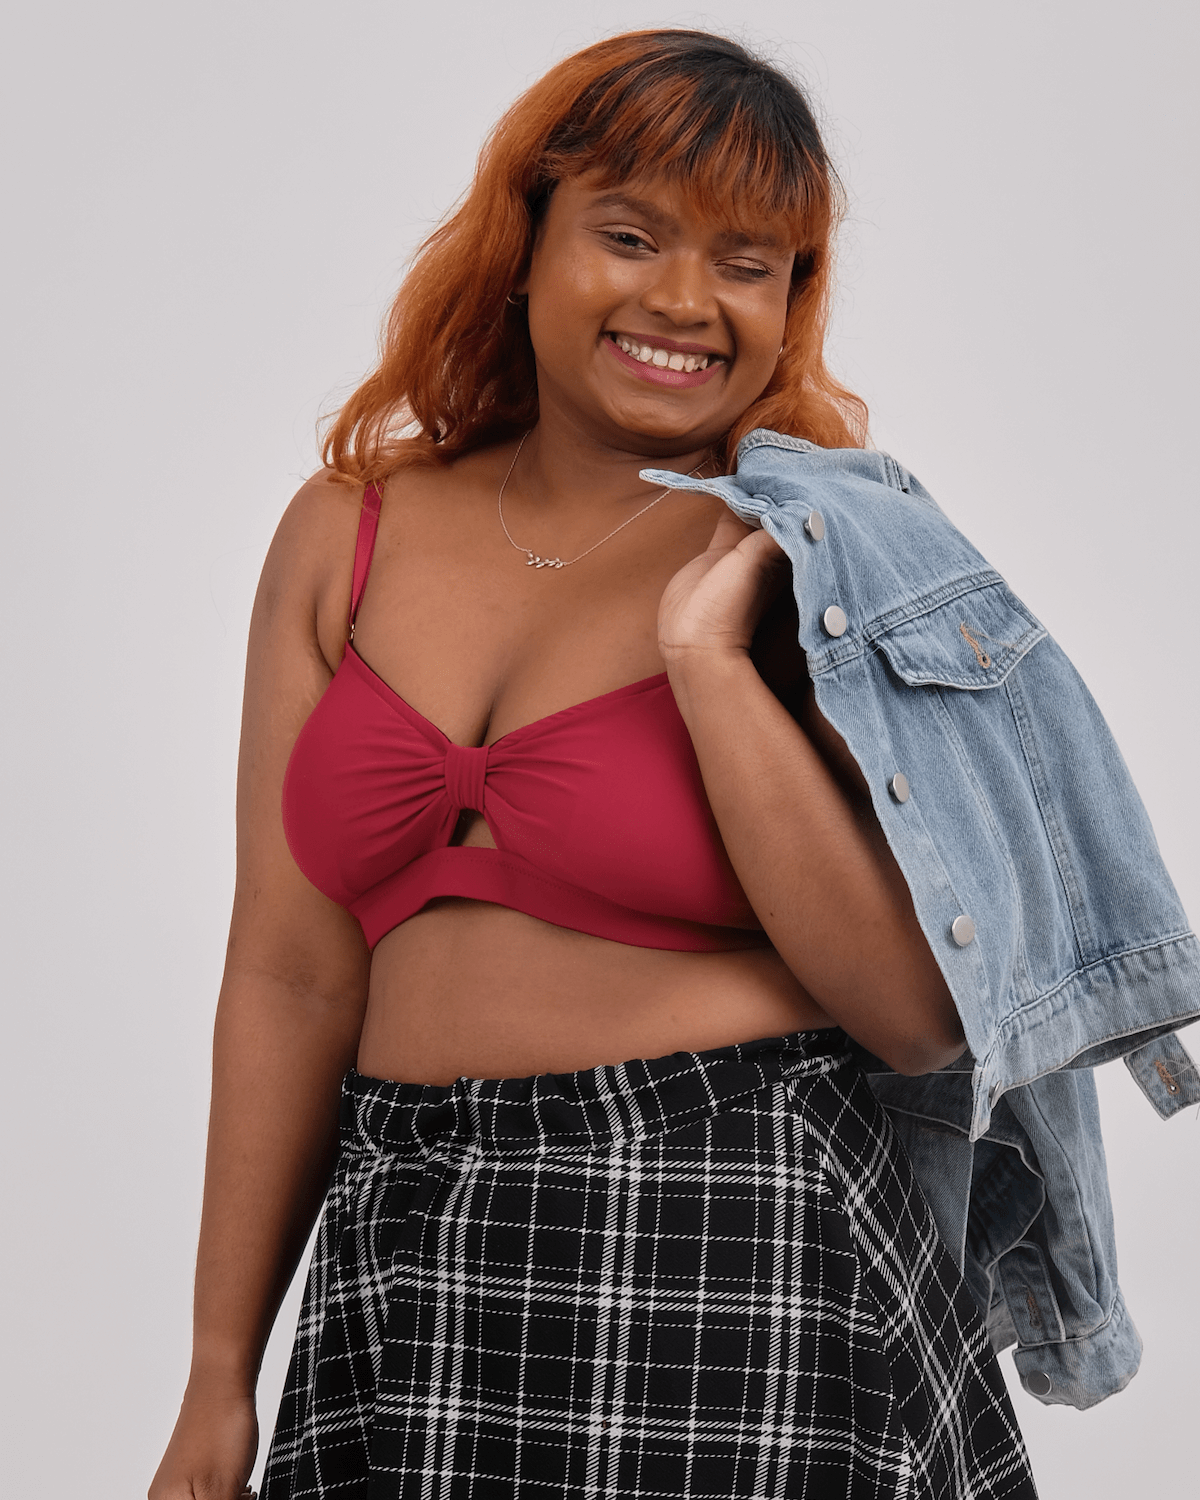 knotty padded strapless bralette in maroon – Our Bralette Club